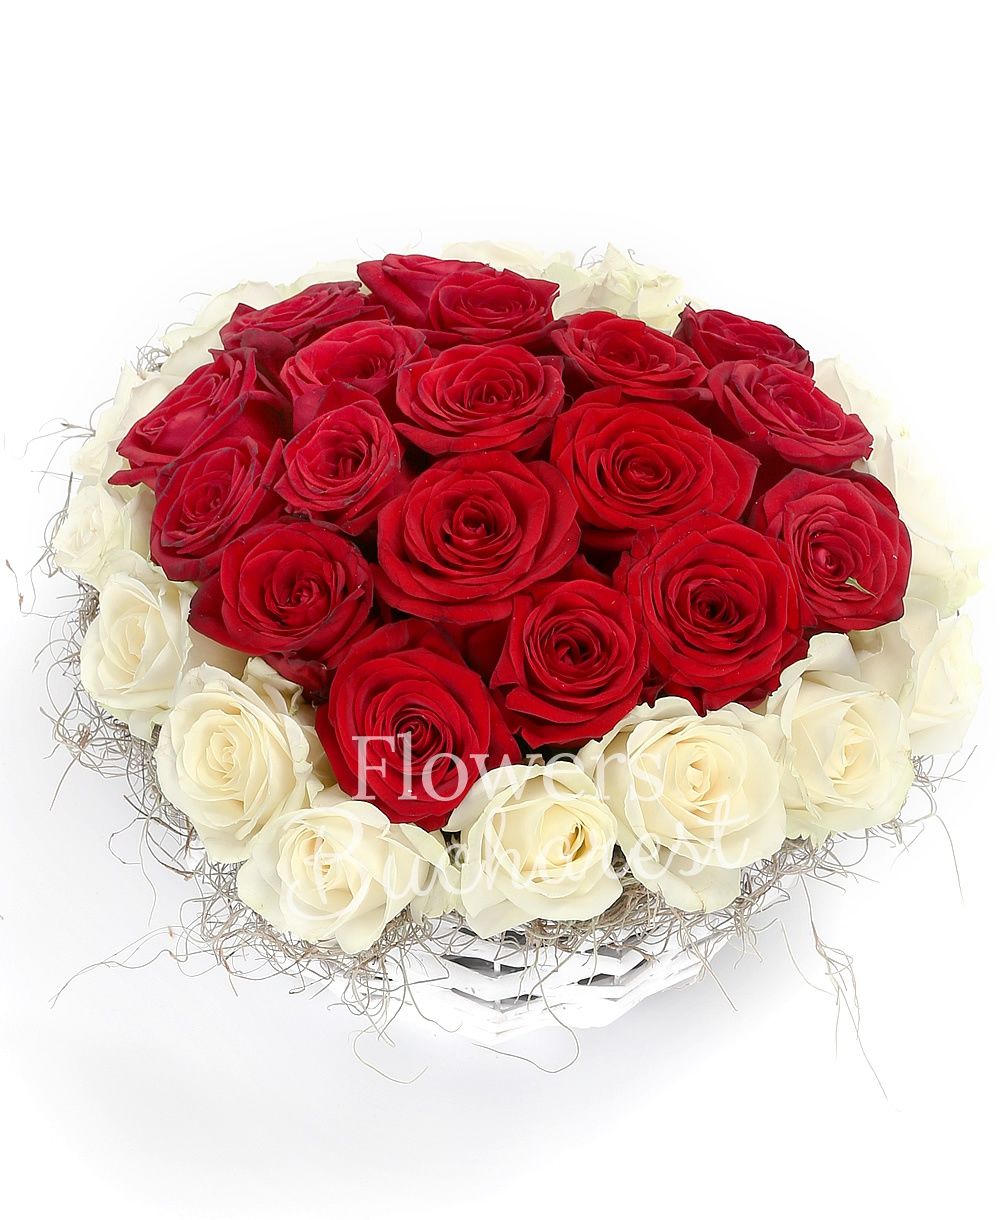 17 red roses, 16 white roses, greenery